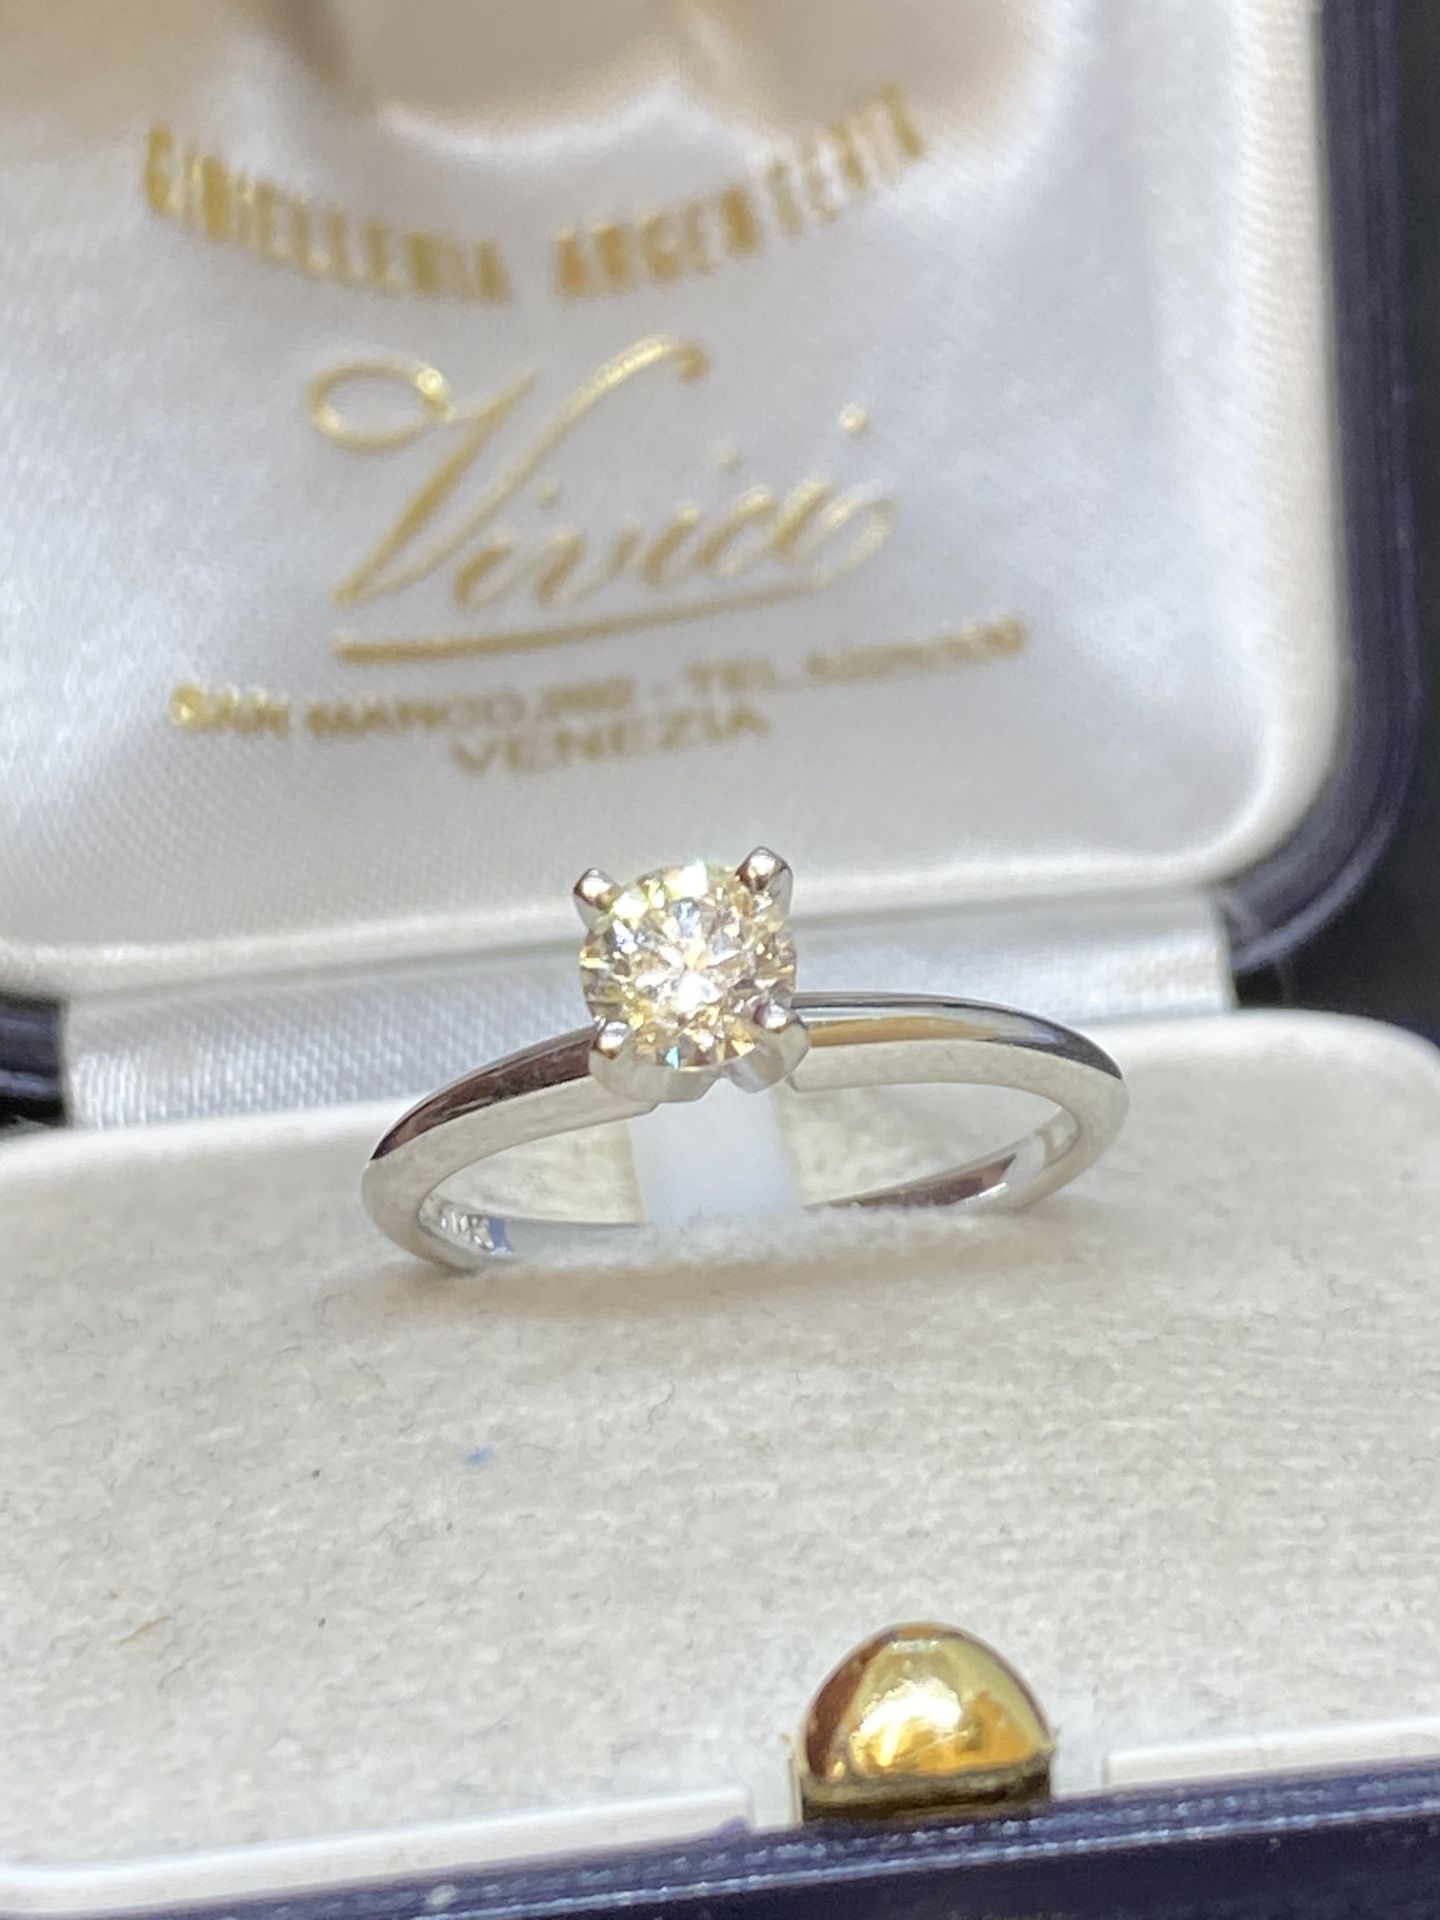 W.G.I 0.56ct H/SI1 DIAMOND SOLITAIRE RING SET IN 14k WHITE GOLD - Image 11 of 11